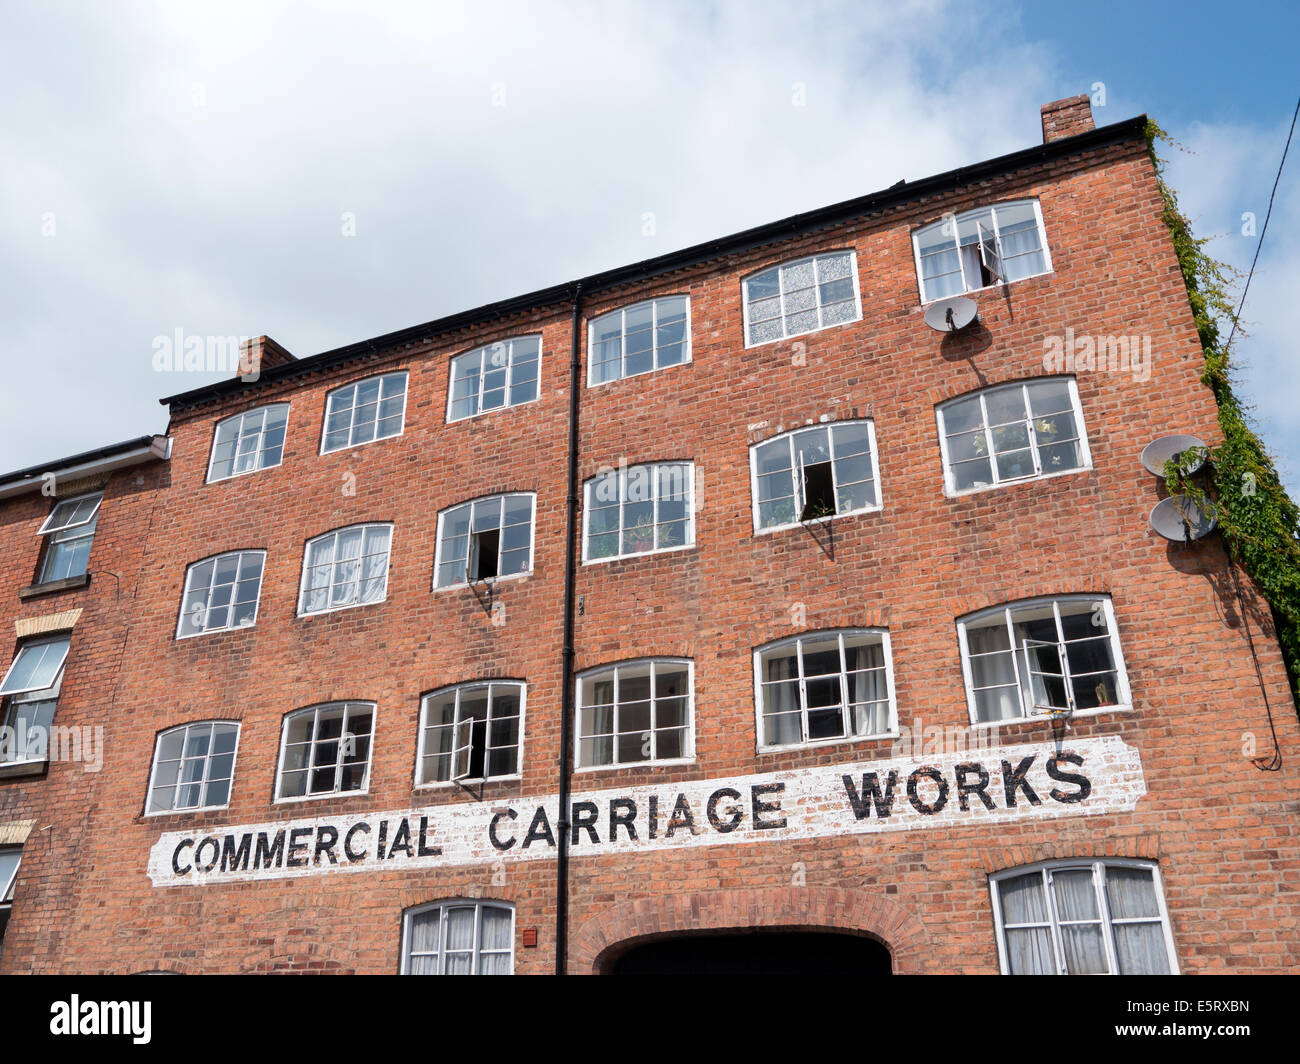 Old Commercial Carriage Works building in Newtown, Powys Wales UK. Stock Photo